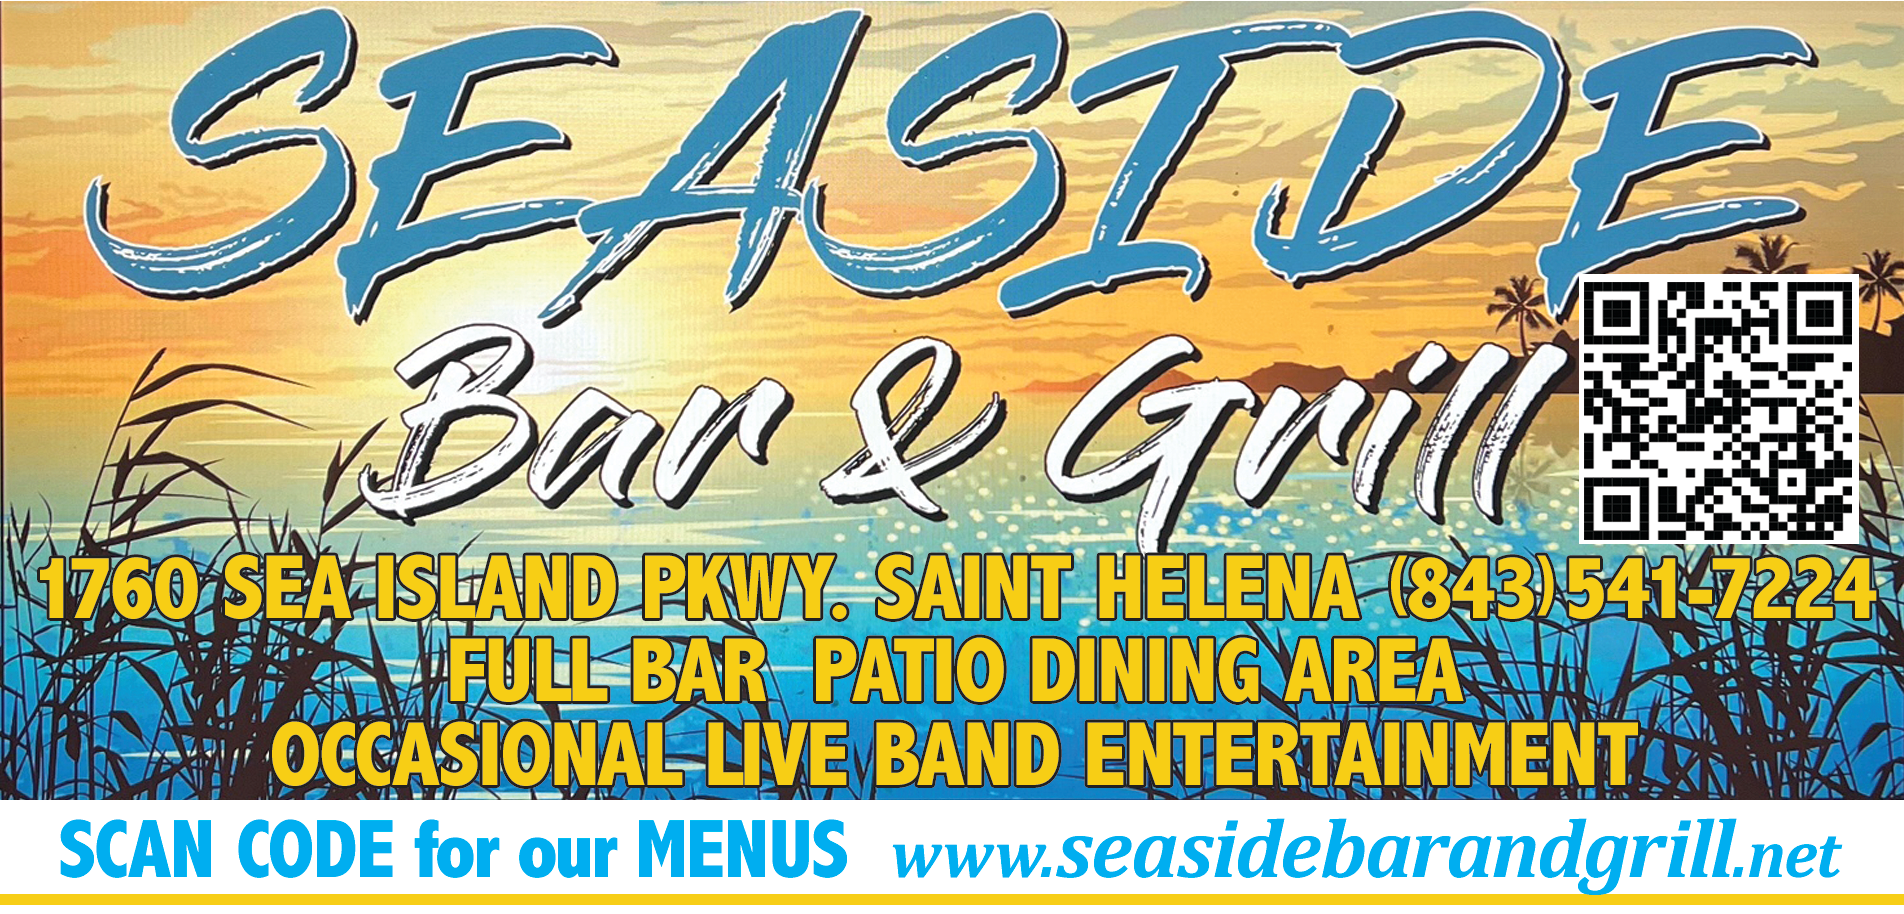 Seaside Bar and Grill Print Ad